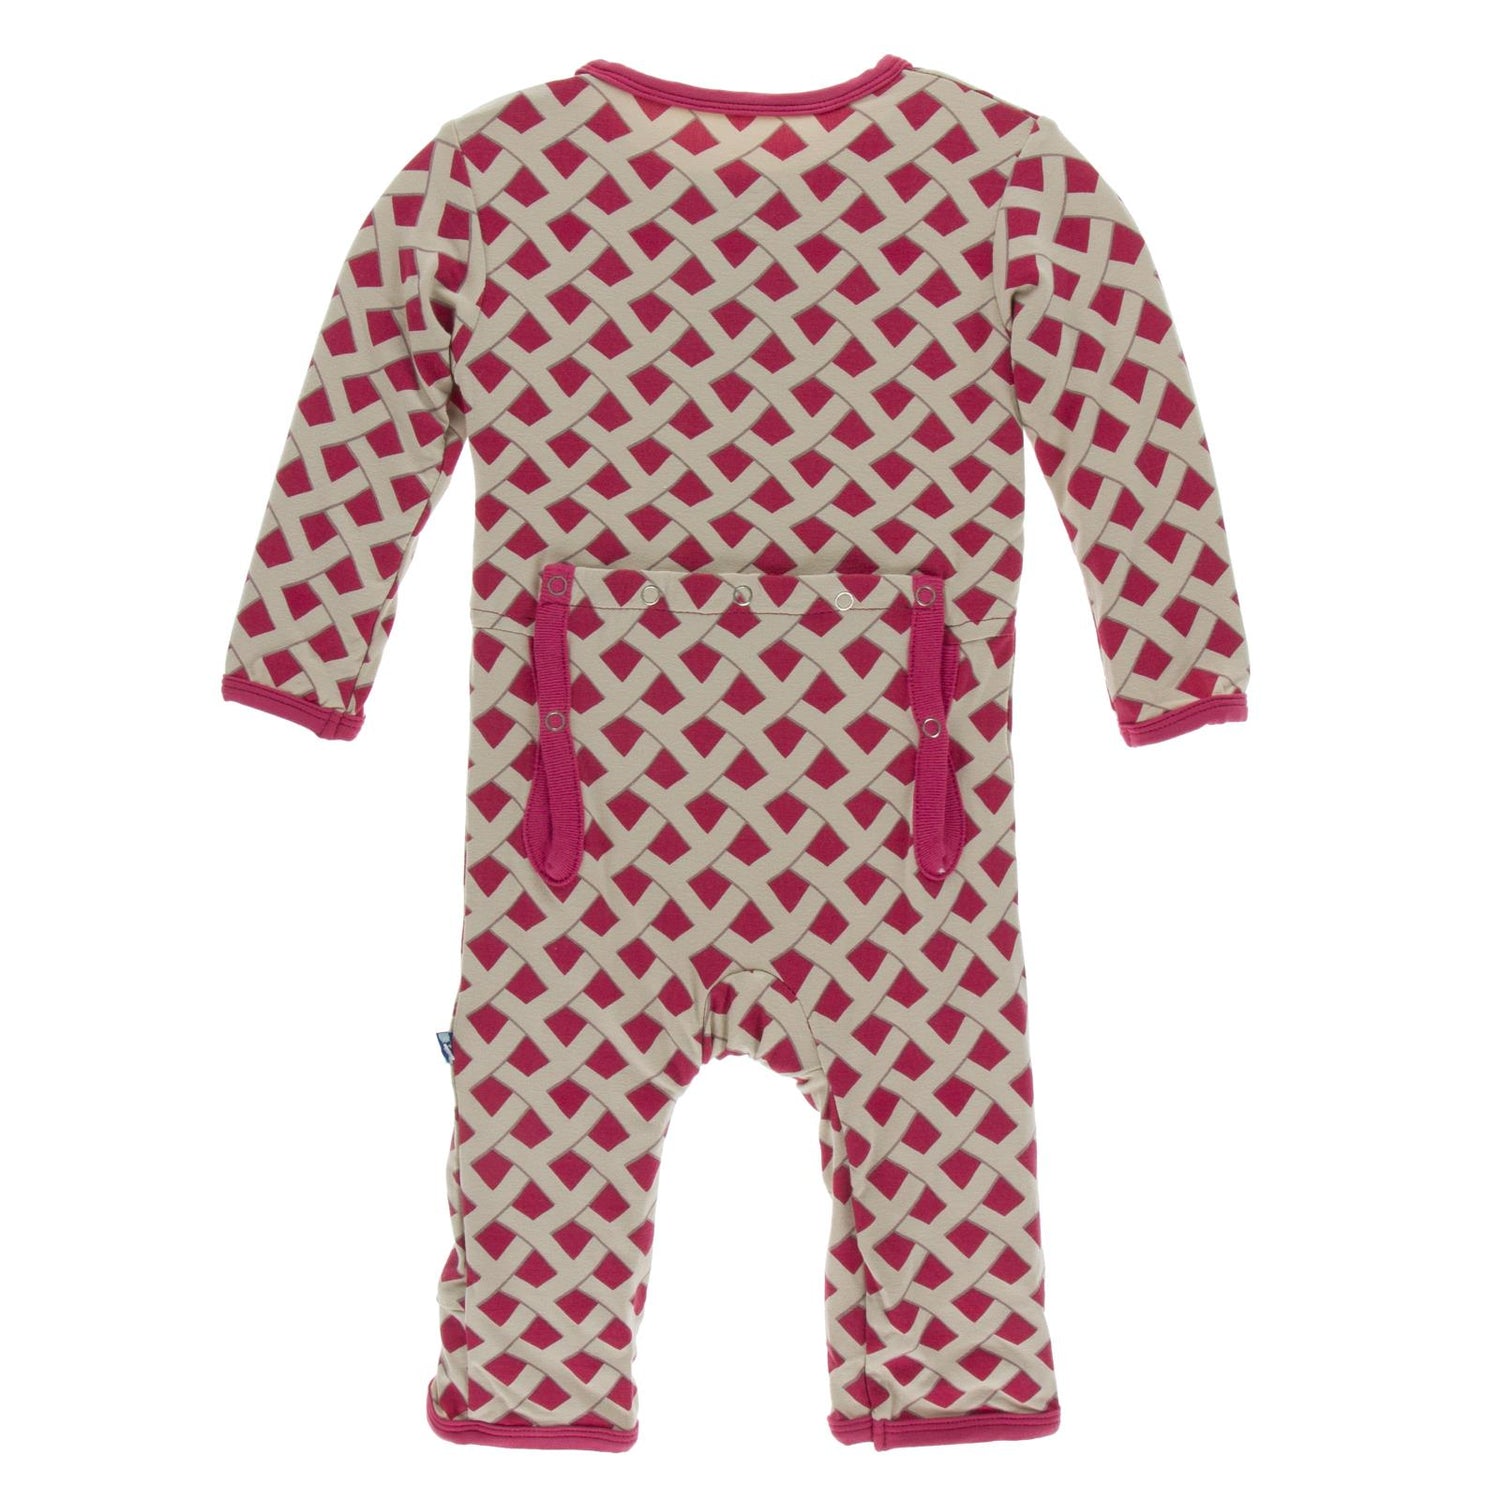 Print Coverall with Zipper in Summer Berry Pie